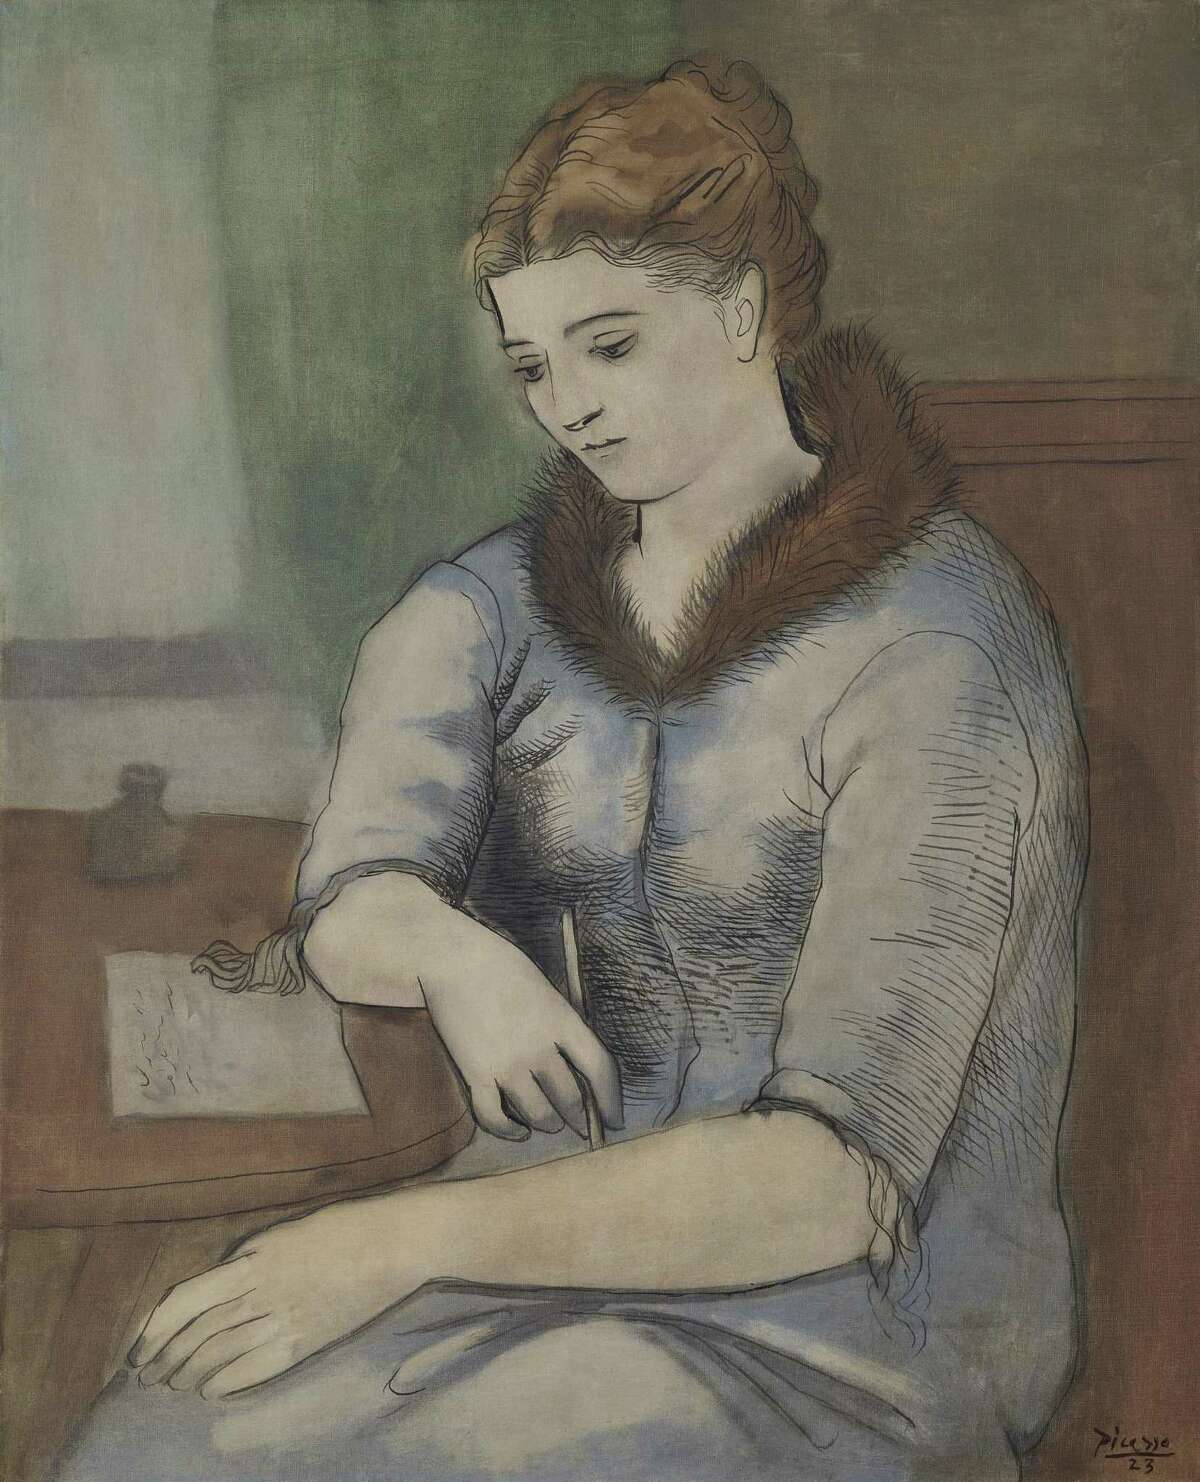 Pablo Picasso's "La Lettre (La Reponse)," a 1923 portrait of his then-wife Olga, sold for $22 million (realizing more than $25 million, with commissions) during Christie’s Impressionist and Modern Art Evening Monday. The painting was among several masterpieces from the estate of H.S.H. Princess "Titi" von Furstenburg, an heiress of Houston’s Blaffer family.